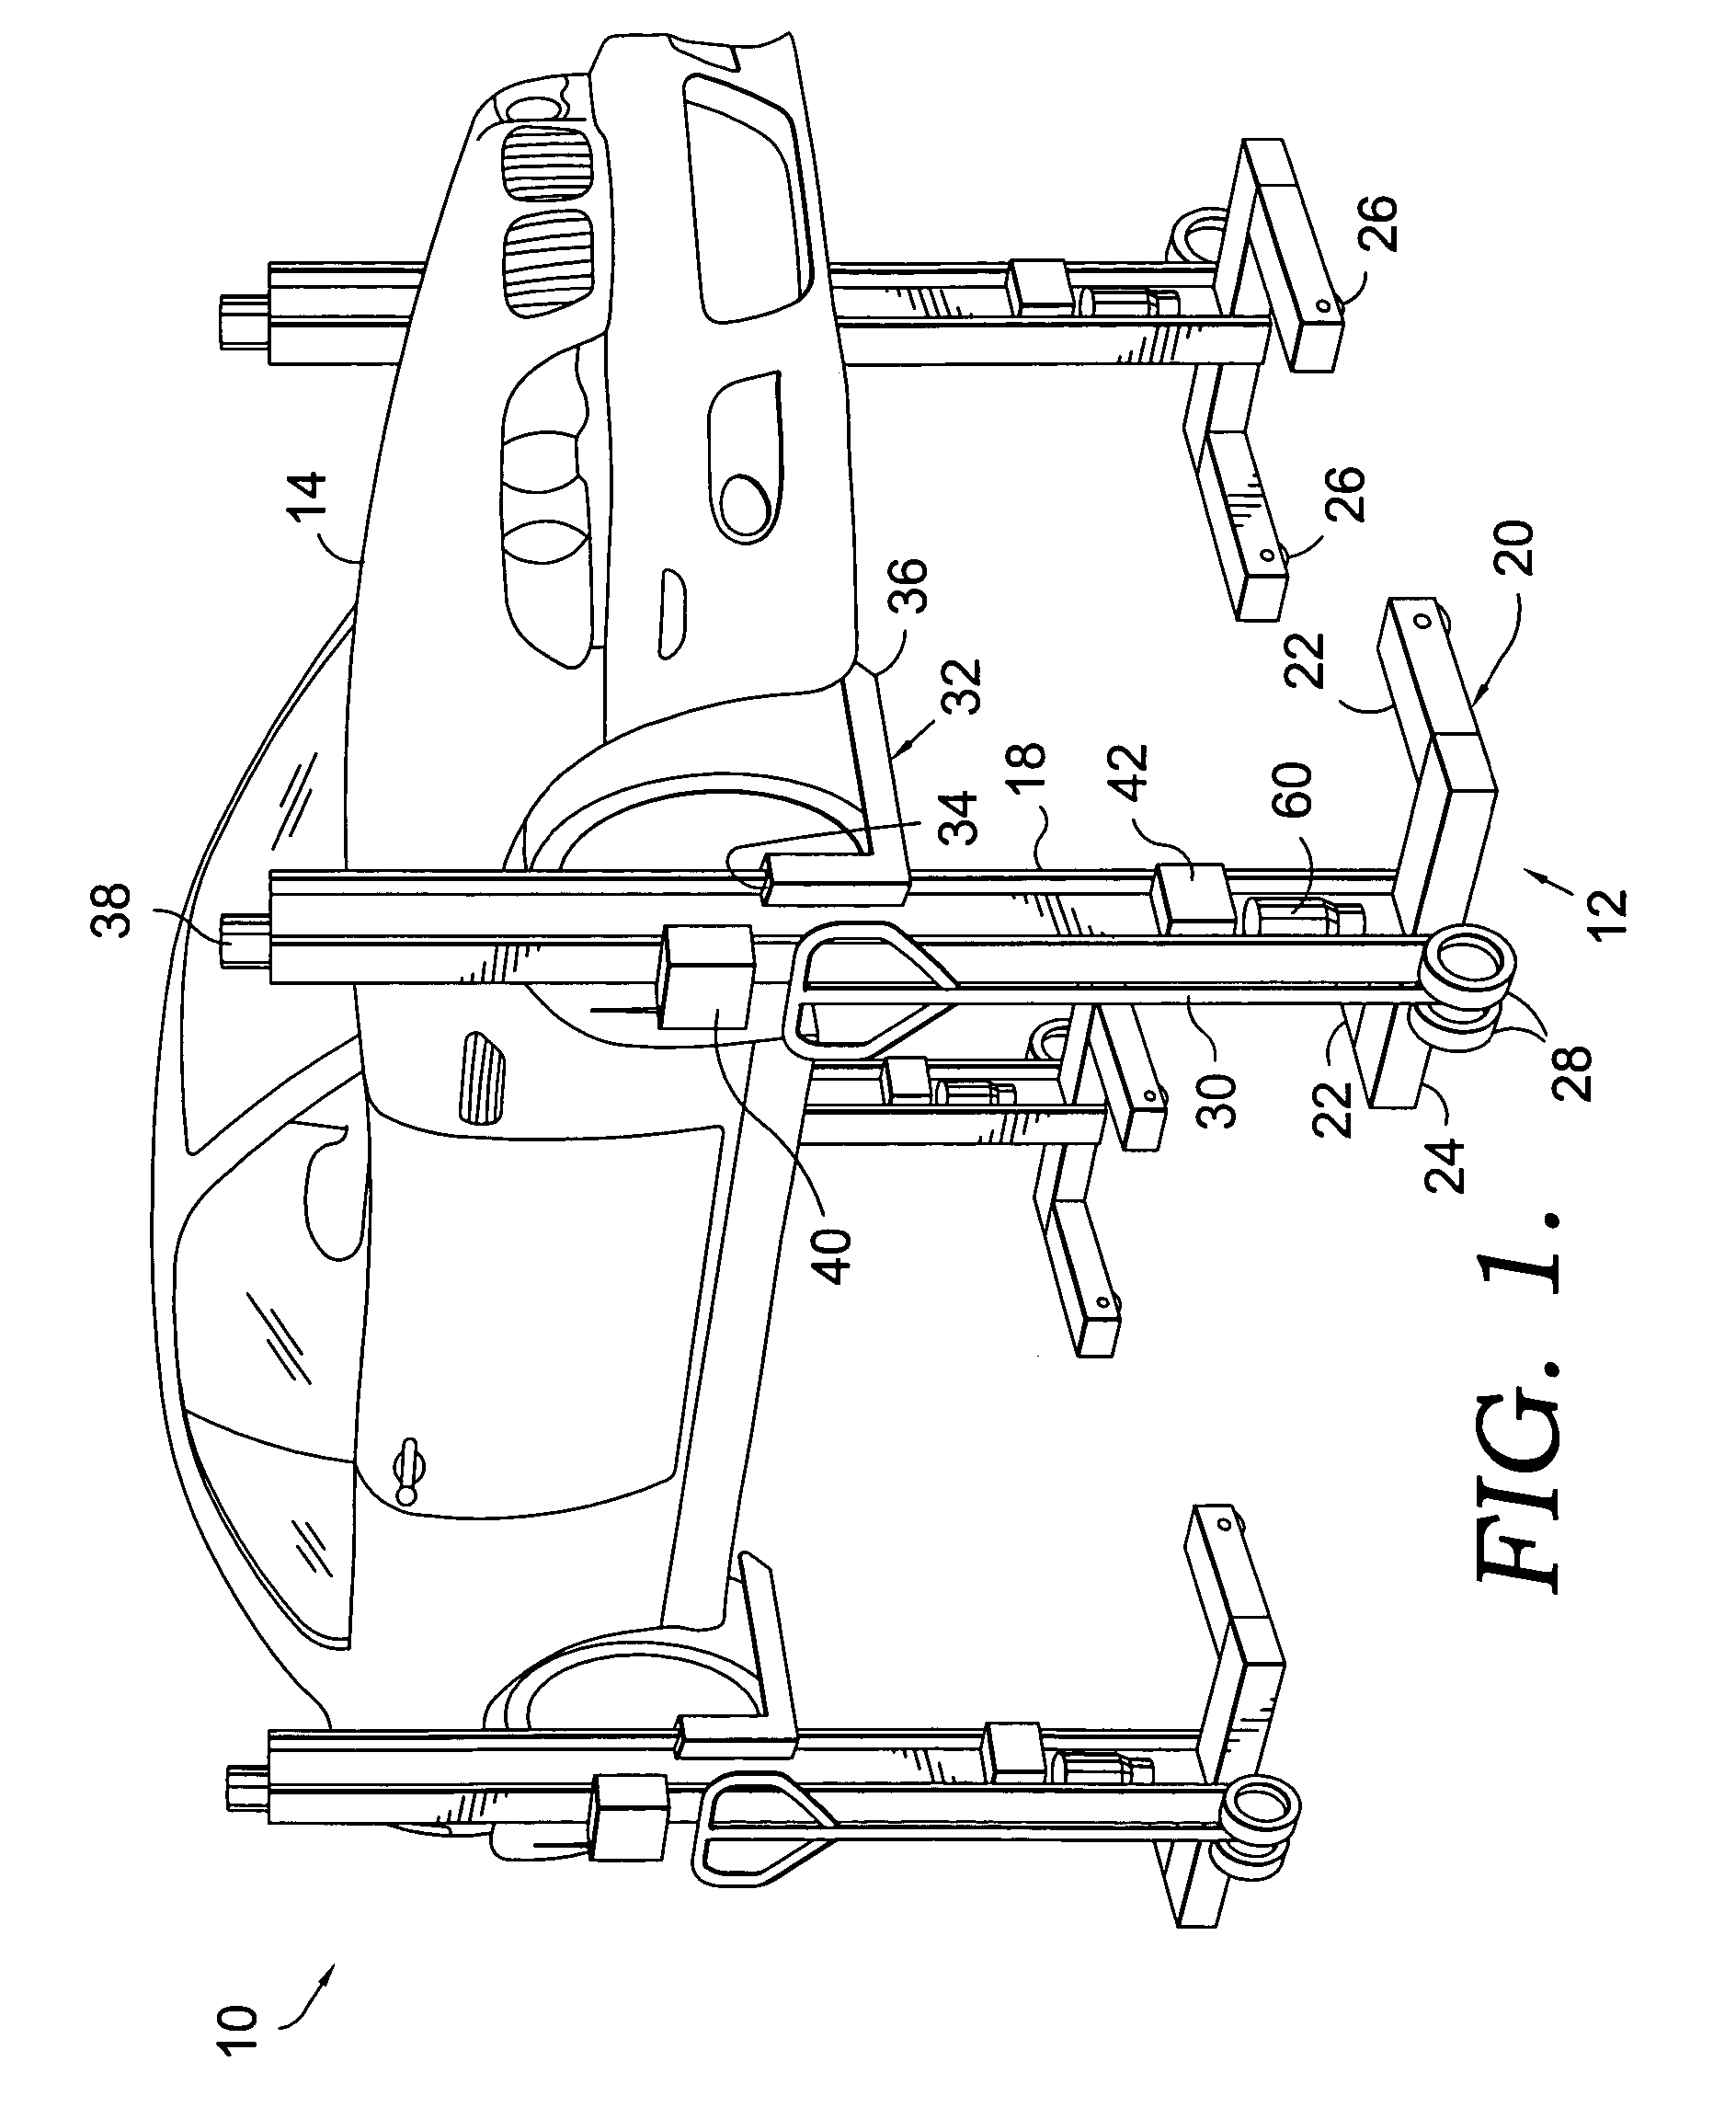 Coordinated lift system with user selectable RF channels